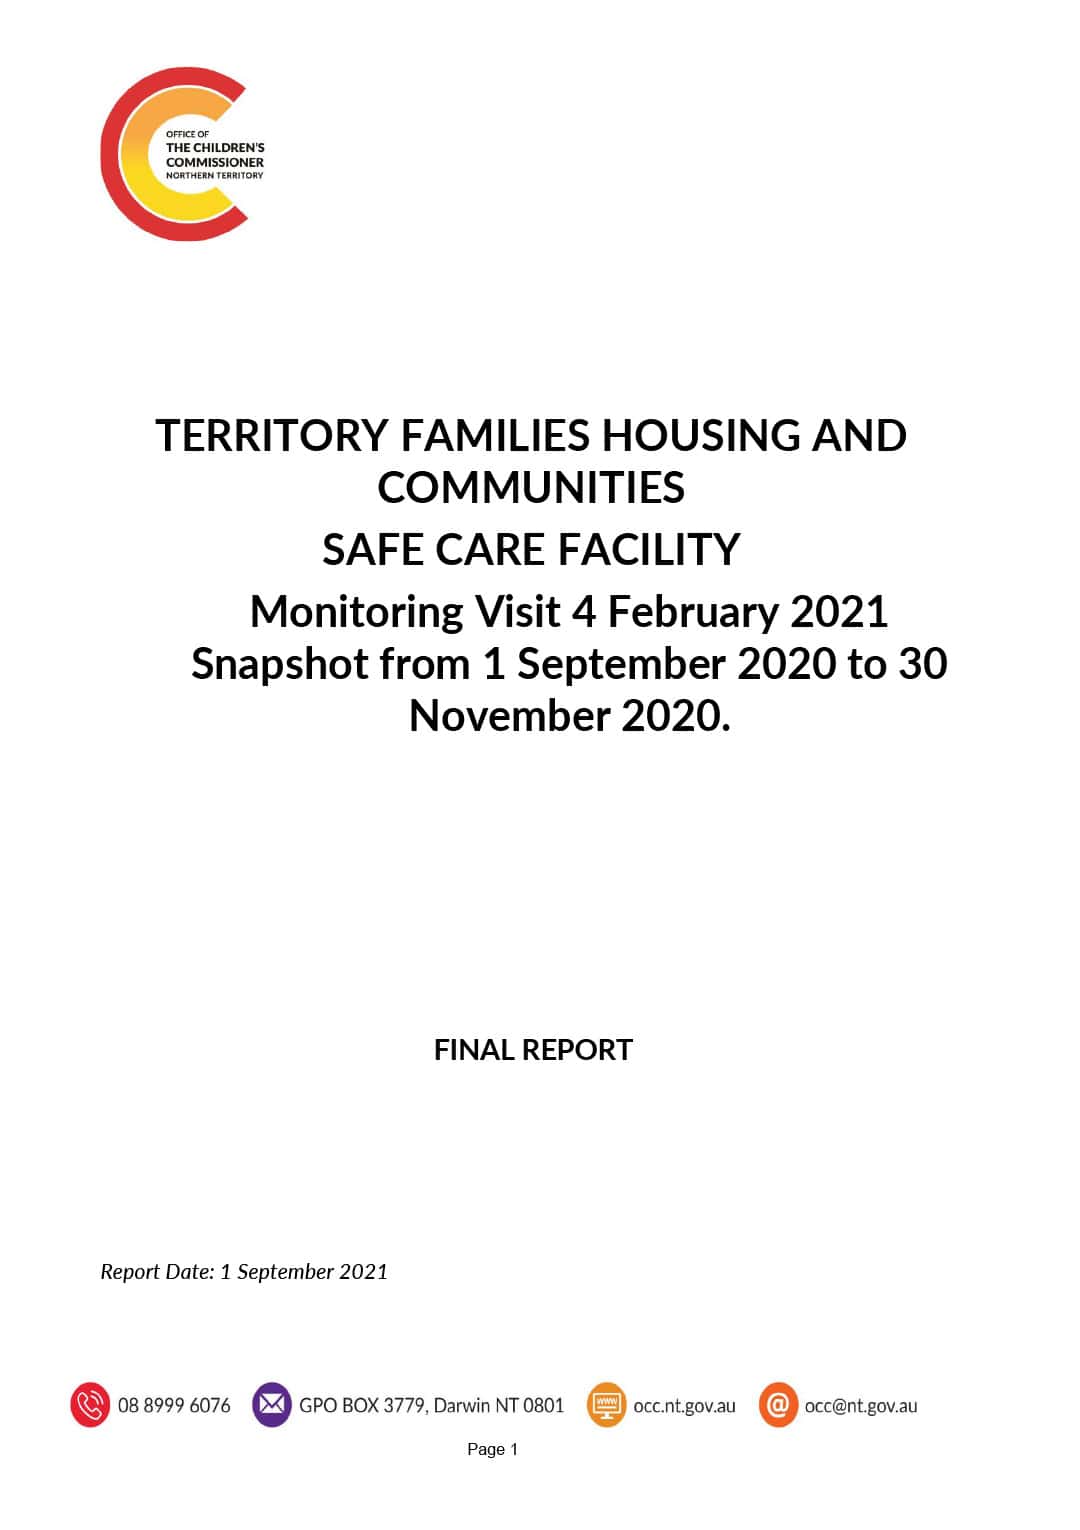 Territory Families Housing and Communities Safe Care Facility - Final Report